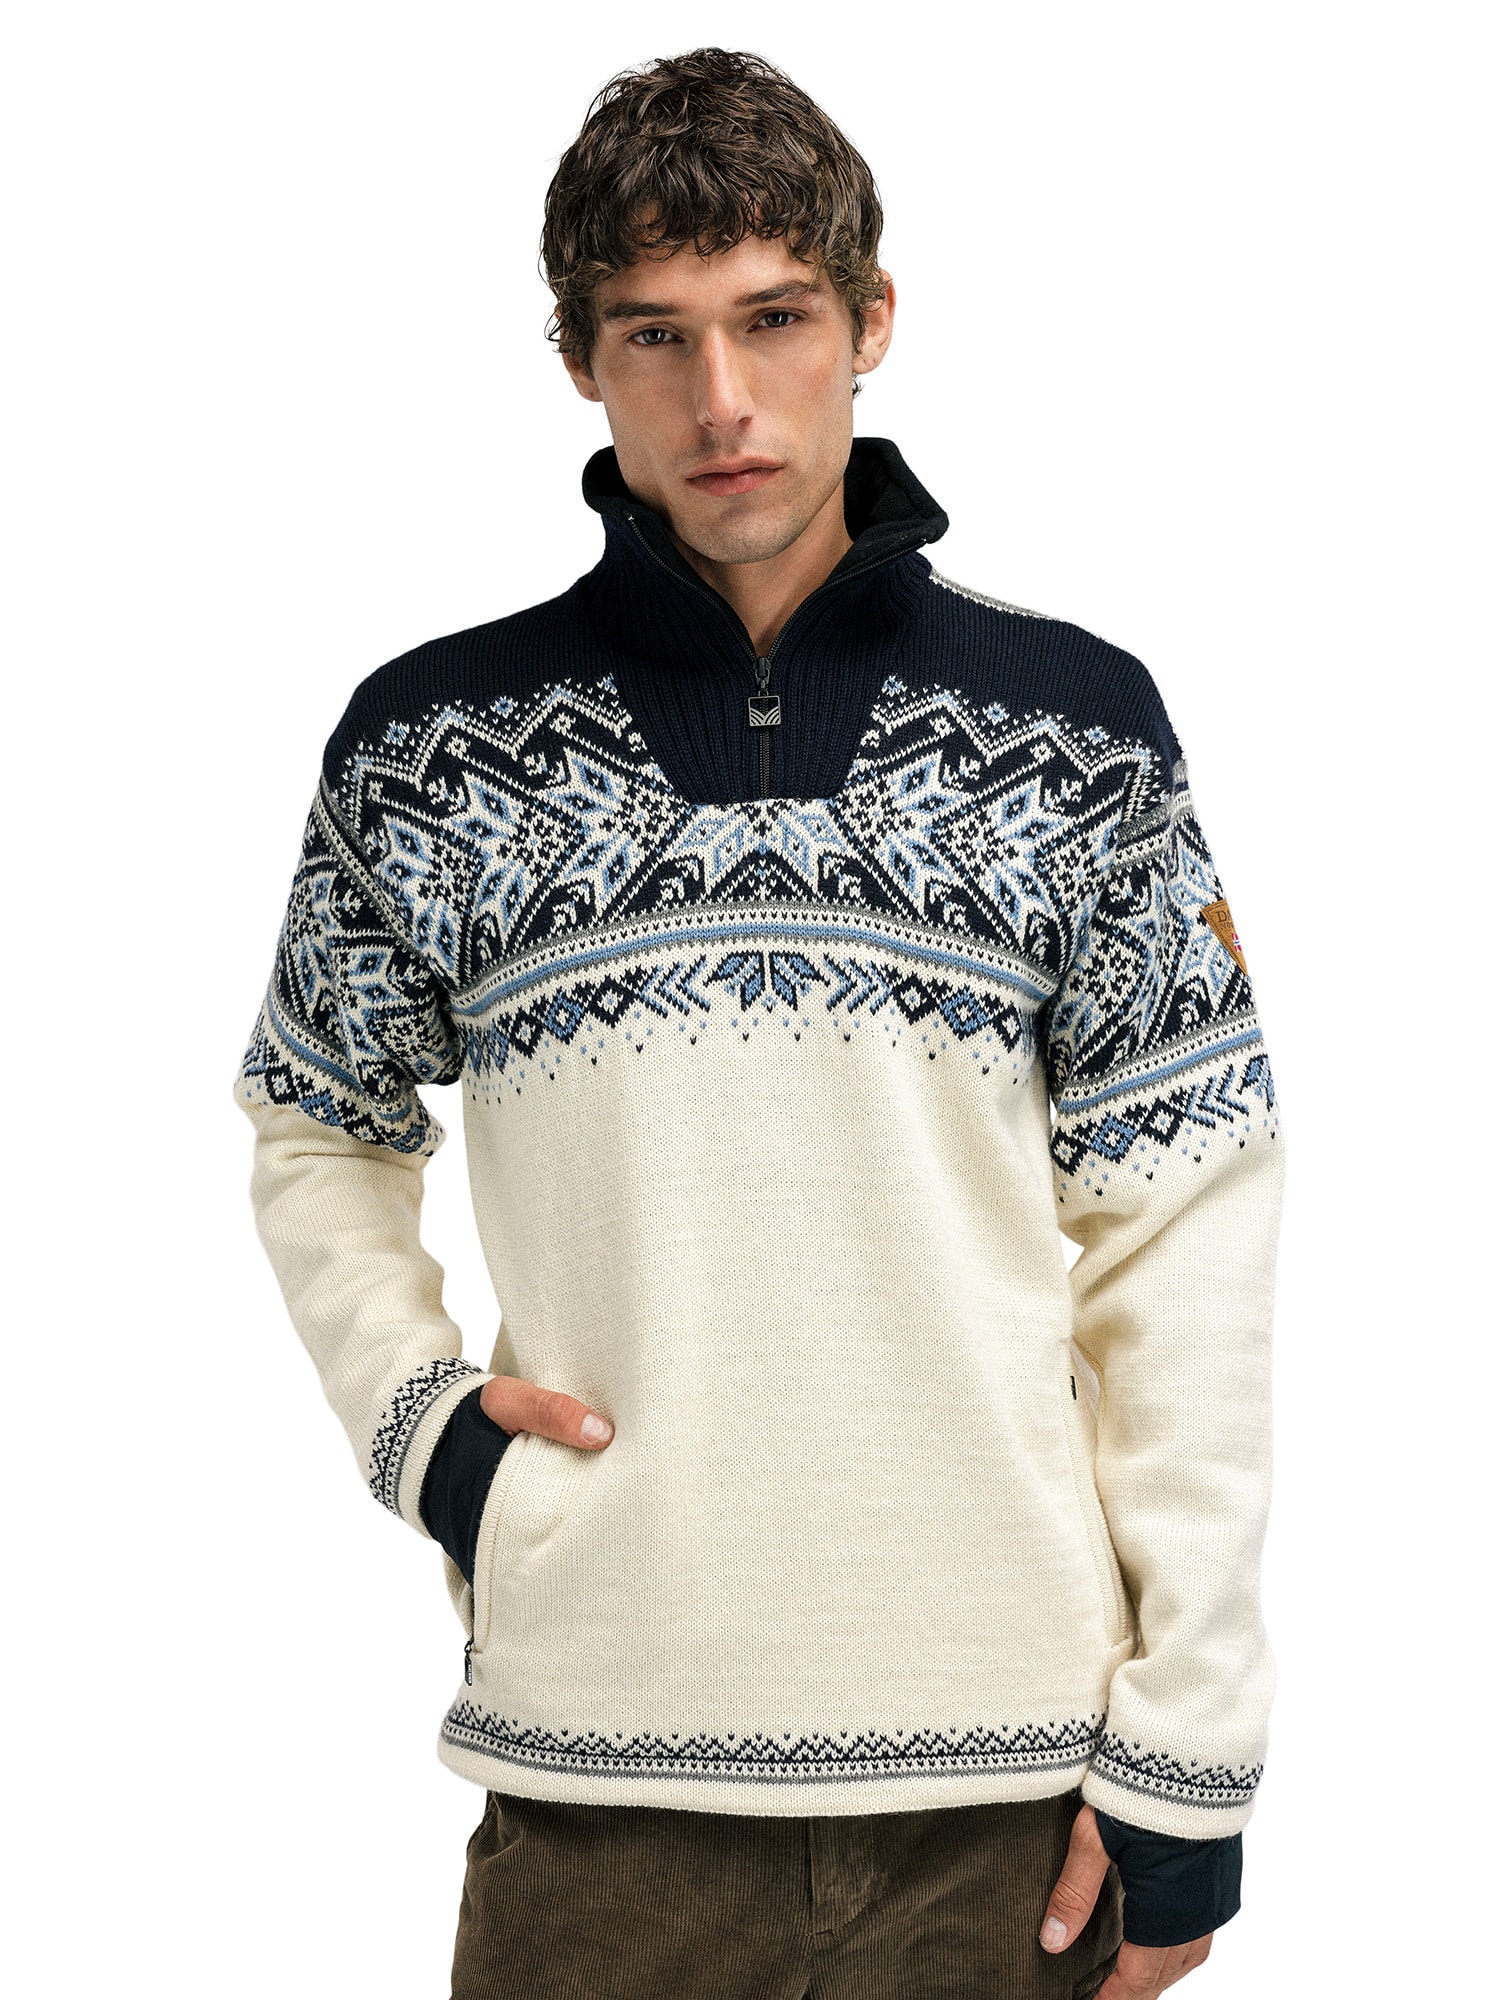 Vail Weatherproof Sweater - Offwhite Men - of of Dale Dale - - Norway Norway